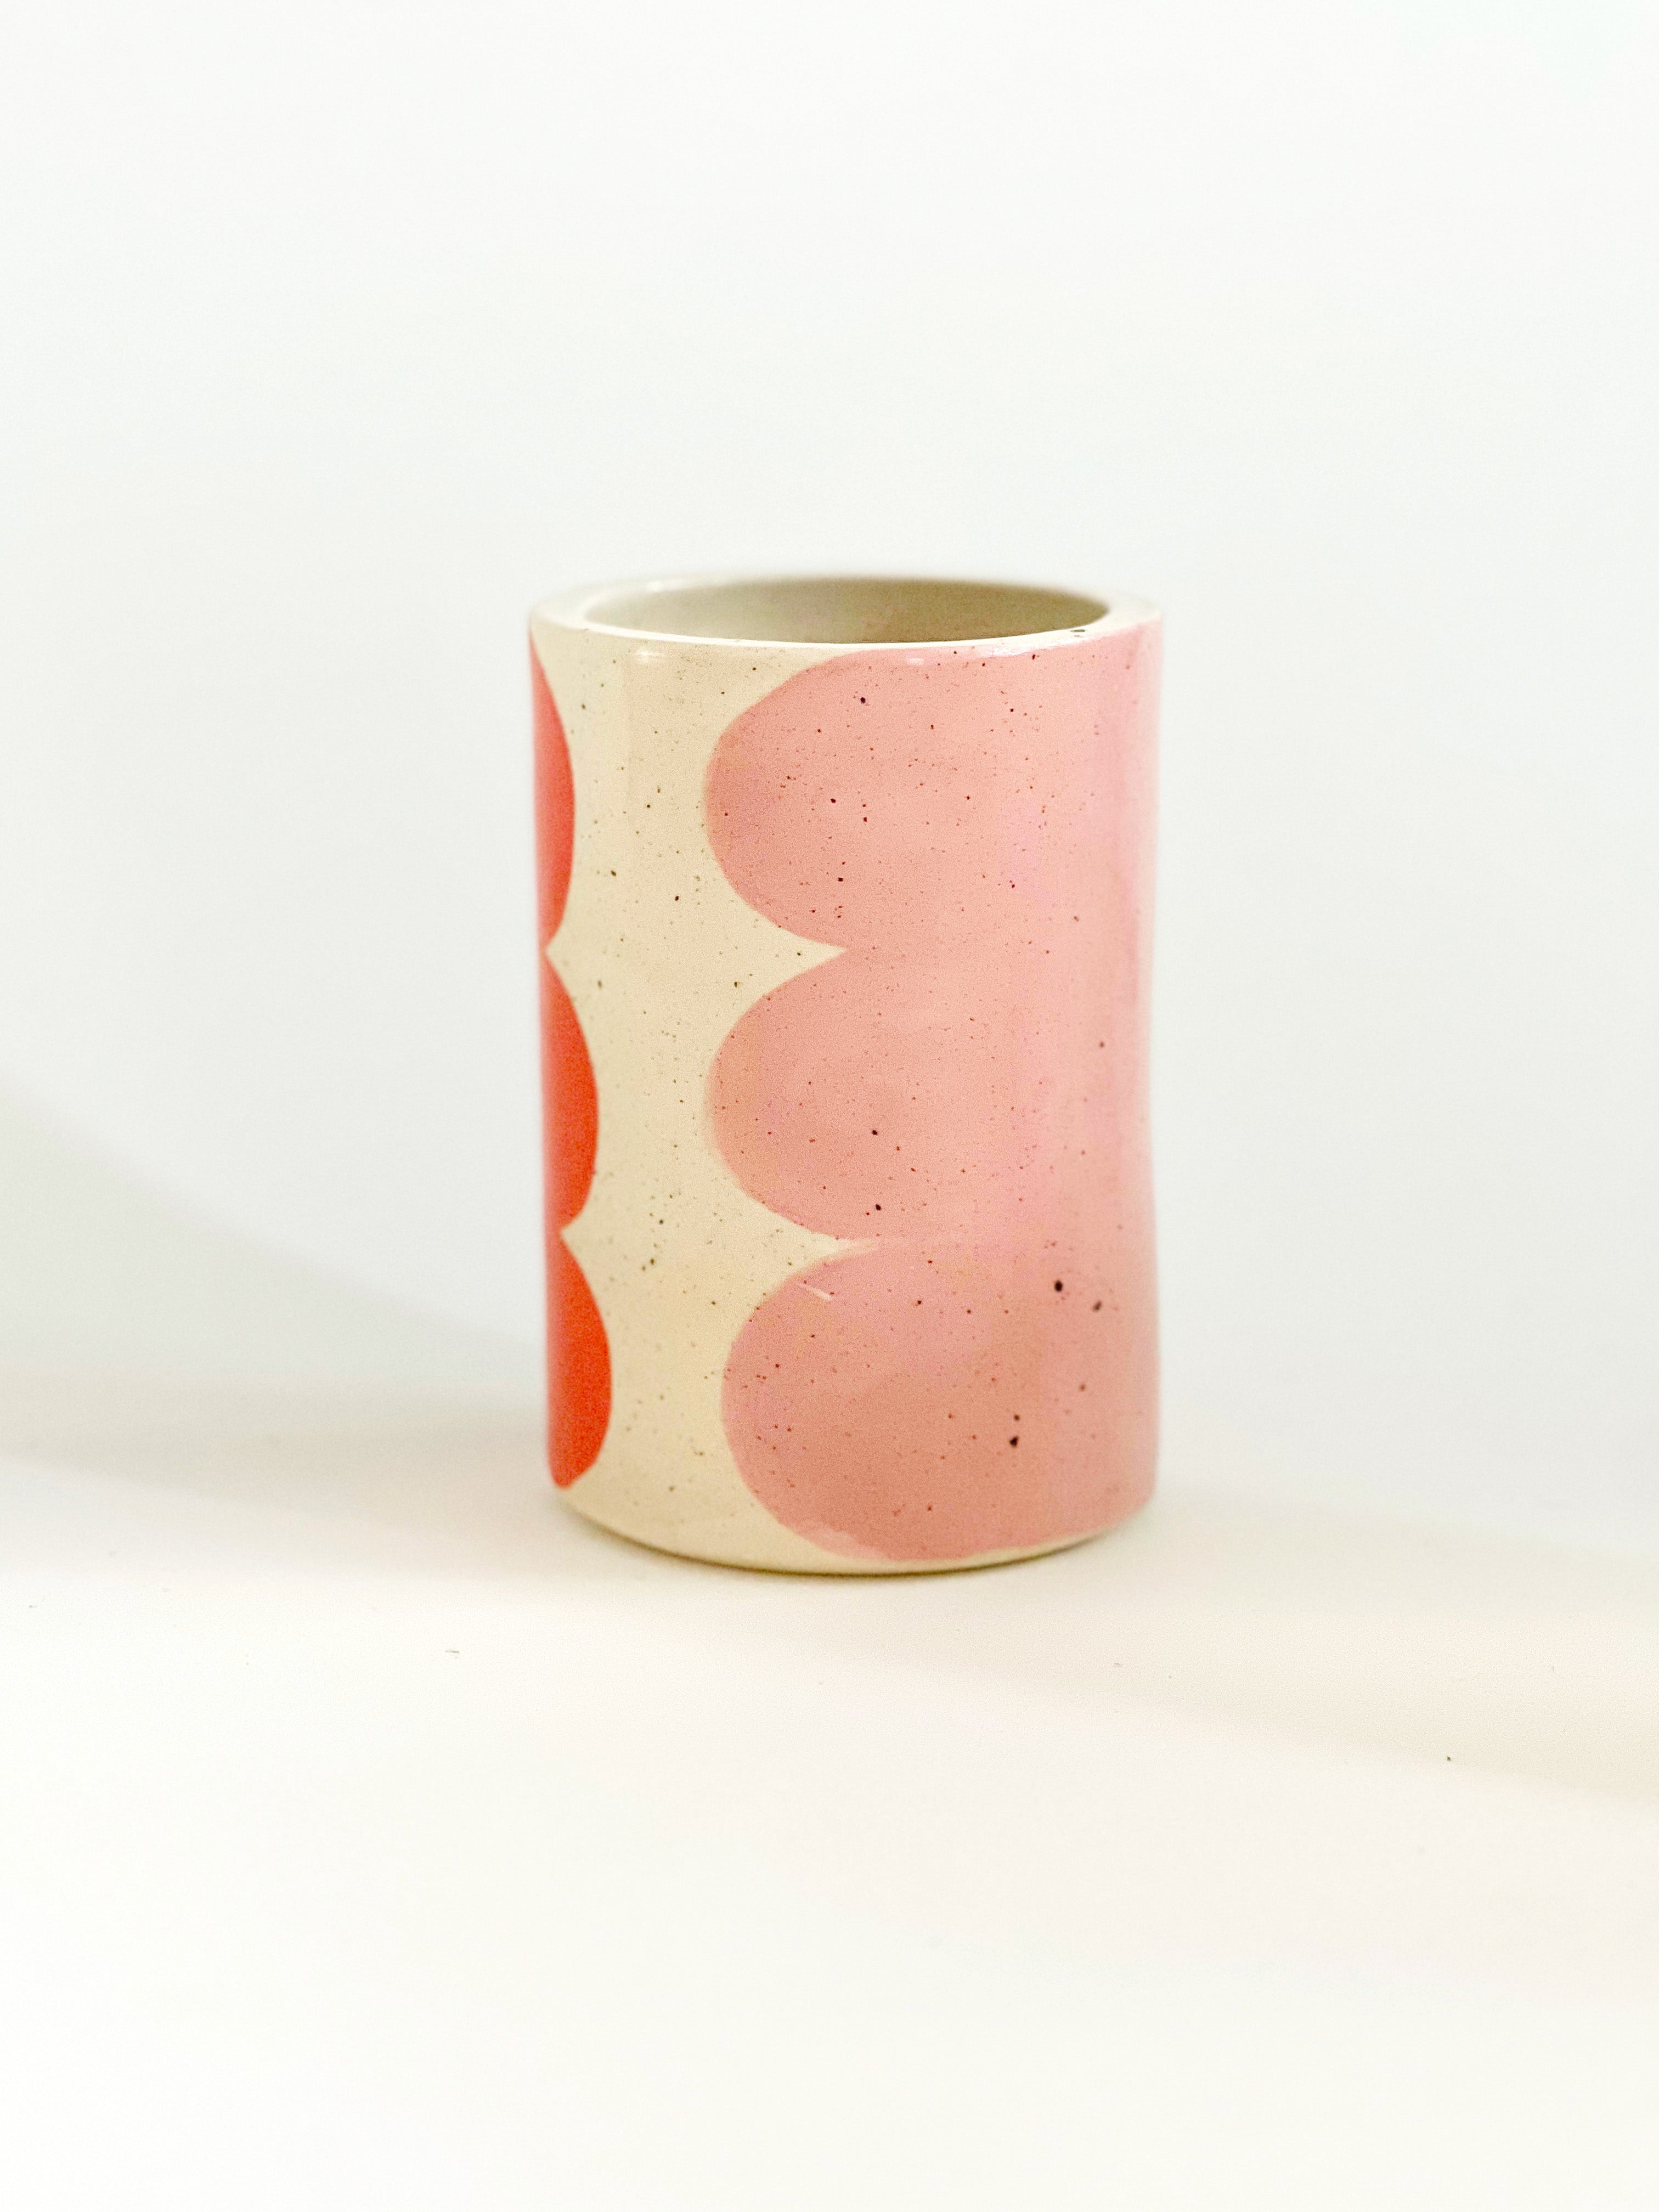 Hand-painted Playful 5.25" Vase